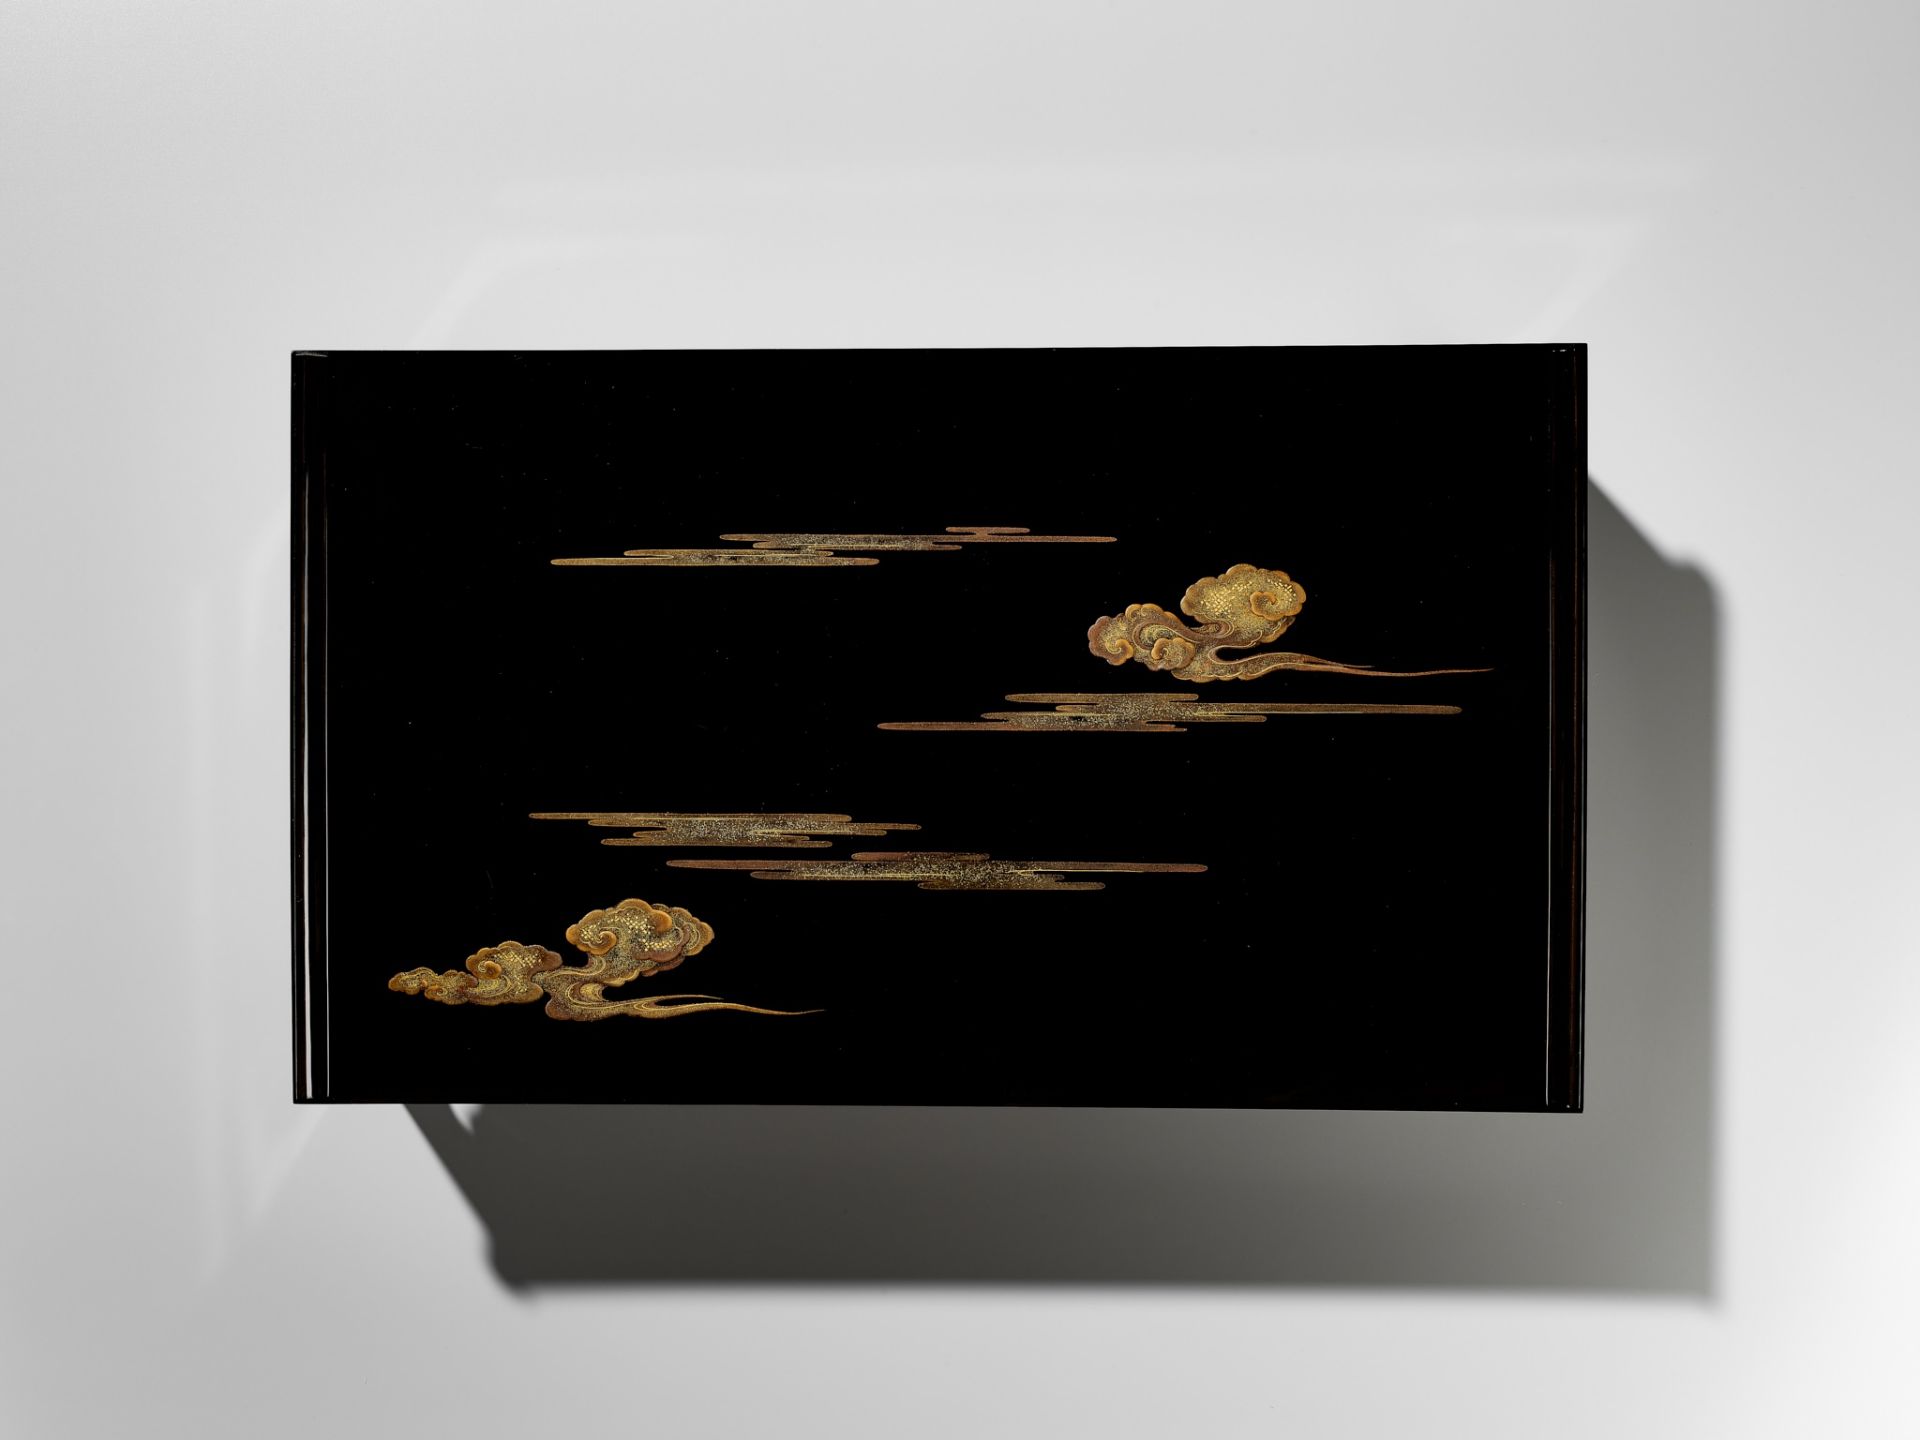 A MAGNIFICENT LACQUER WRITING SET WITH THE RISING SUN, CRESCENT MOON AND CLOUDS - Bild 4 aus 7